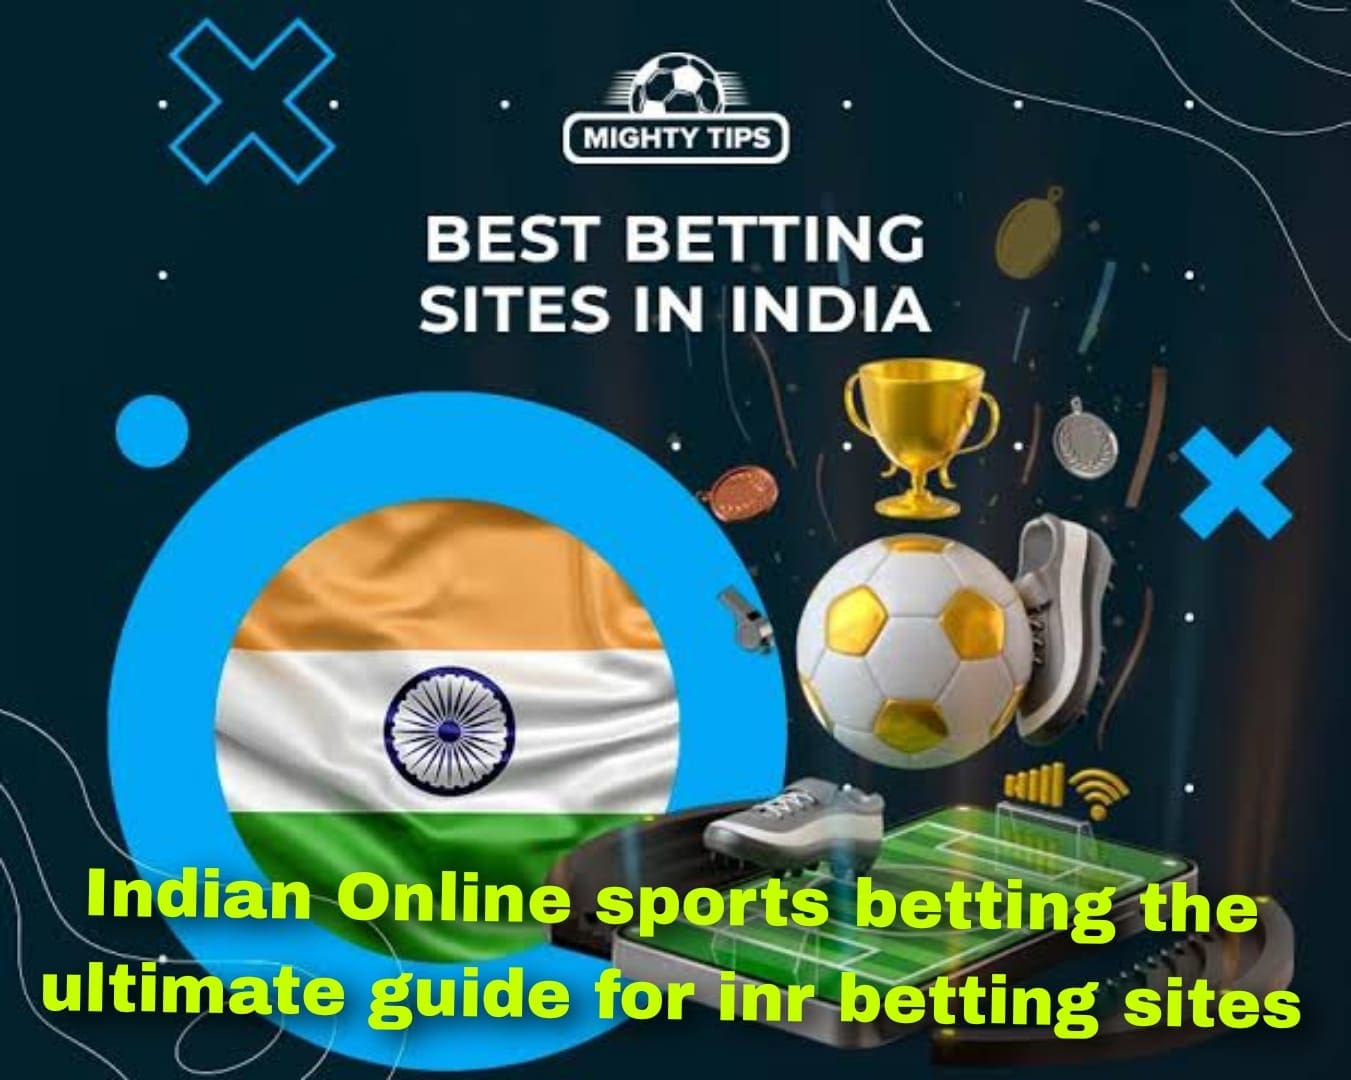 INDIA ONLINE SPORTS BETTING – THE ULTIMATE GUIDE FOR INR BETTING SITES :